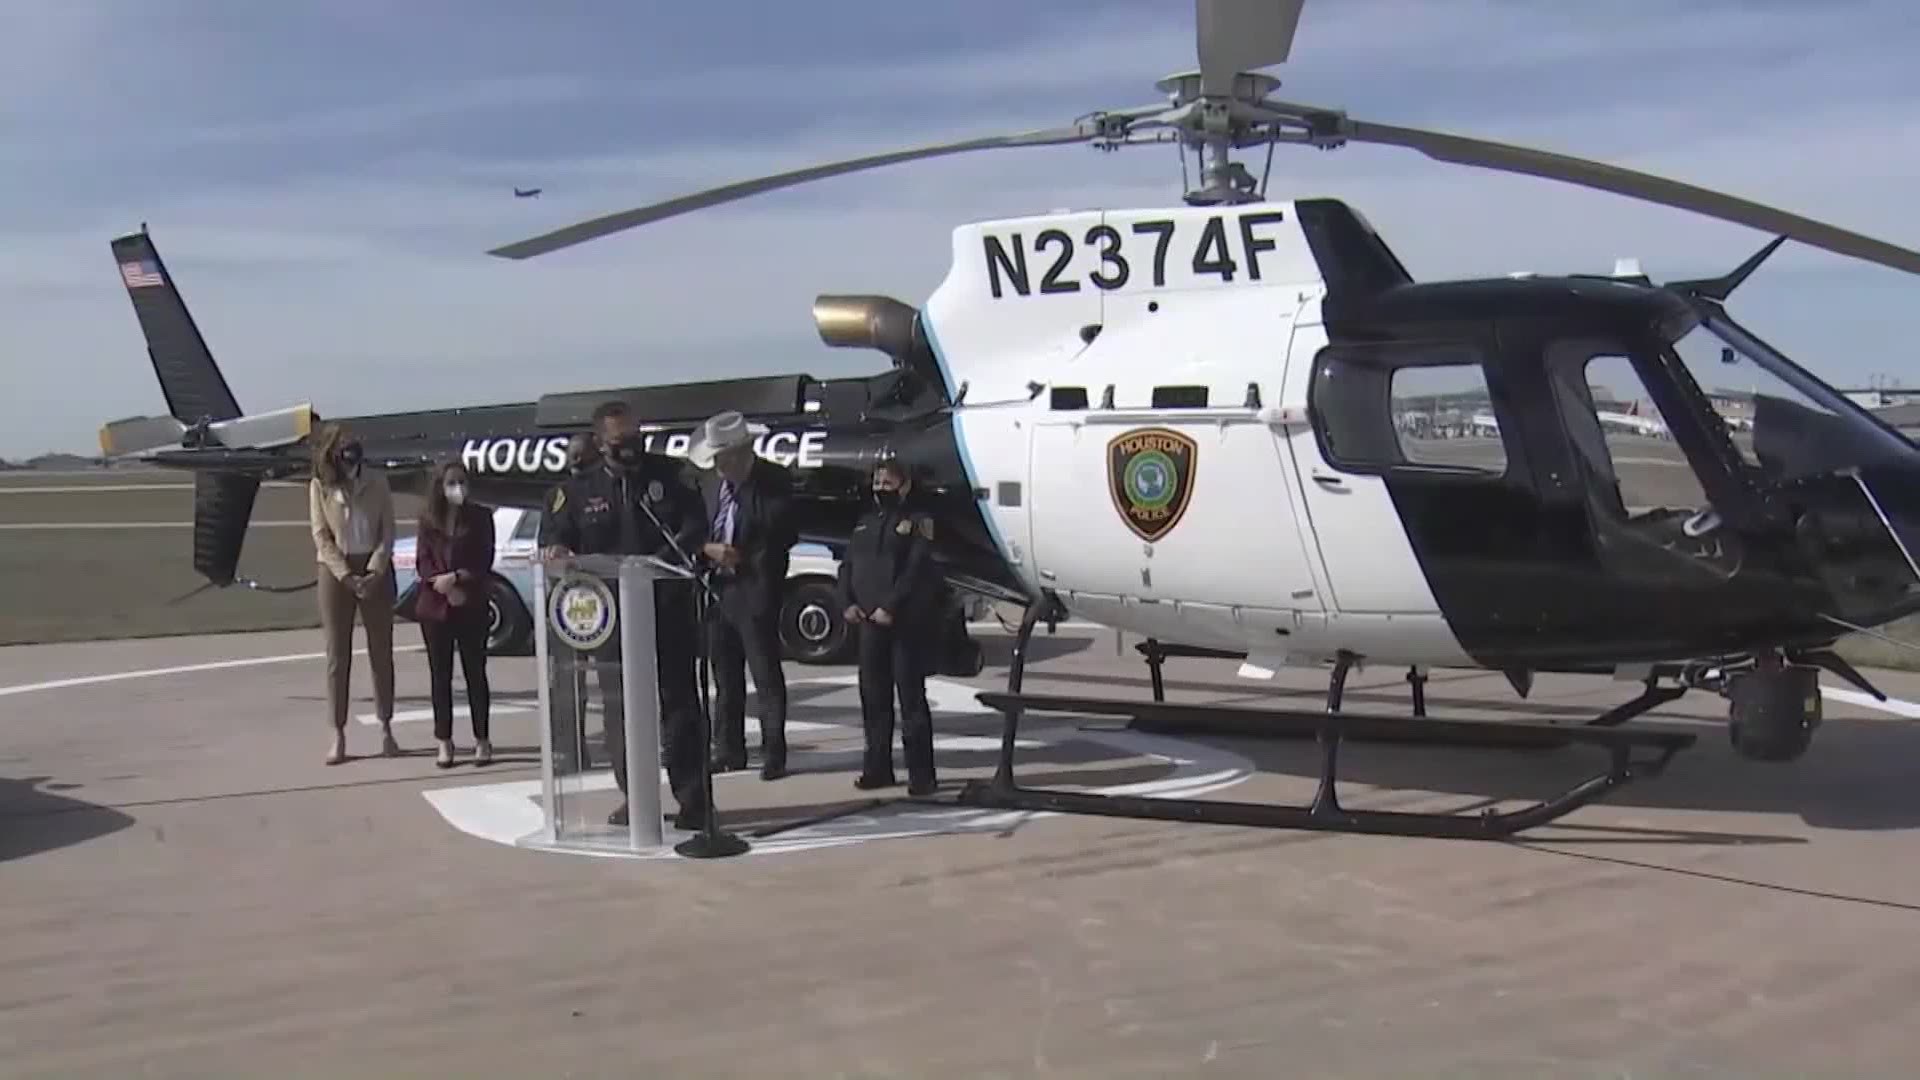 The new chopper, which is the first of its kind for the Houston Police Department, has the officer's badge number on it.